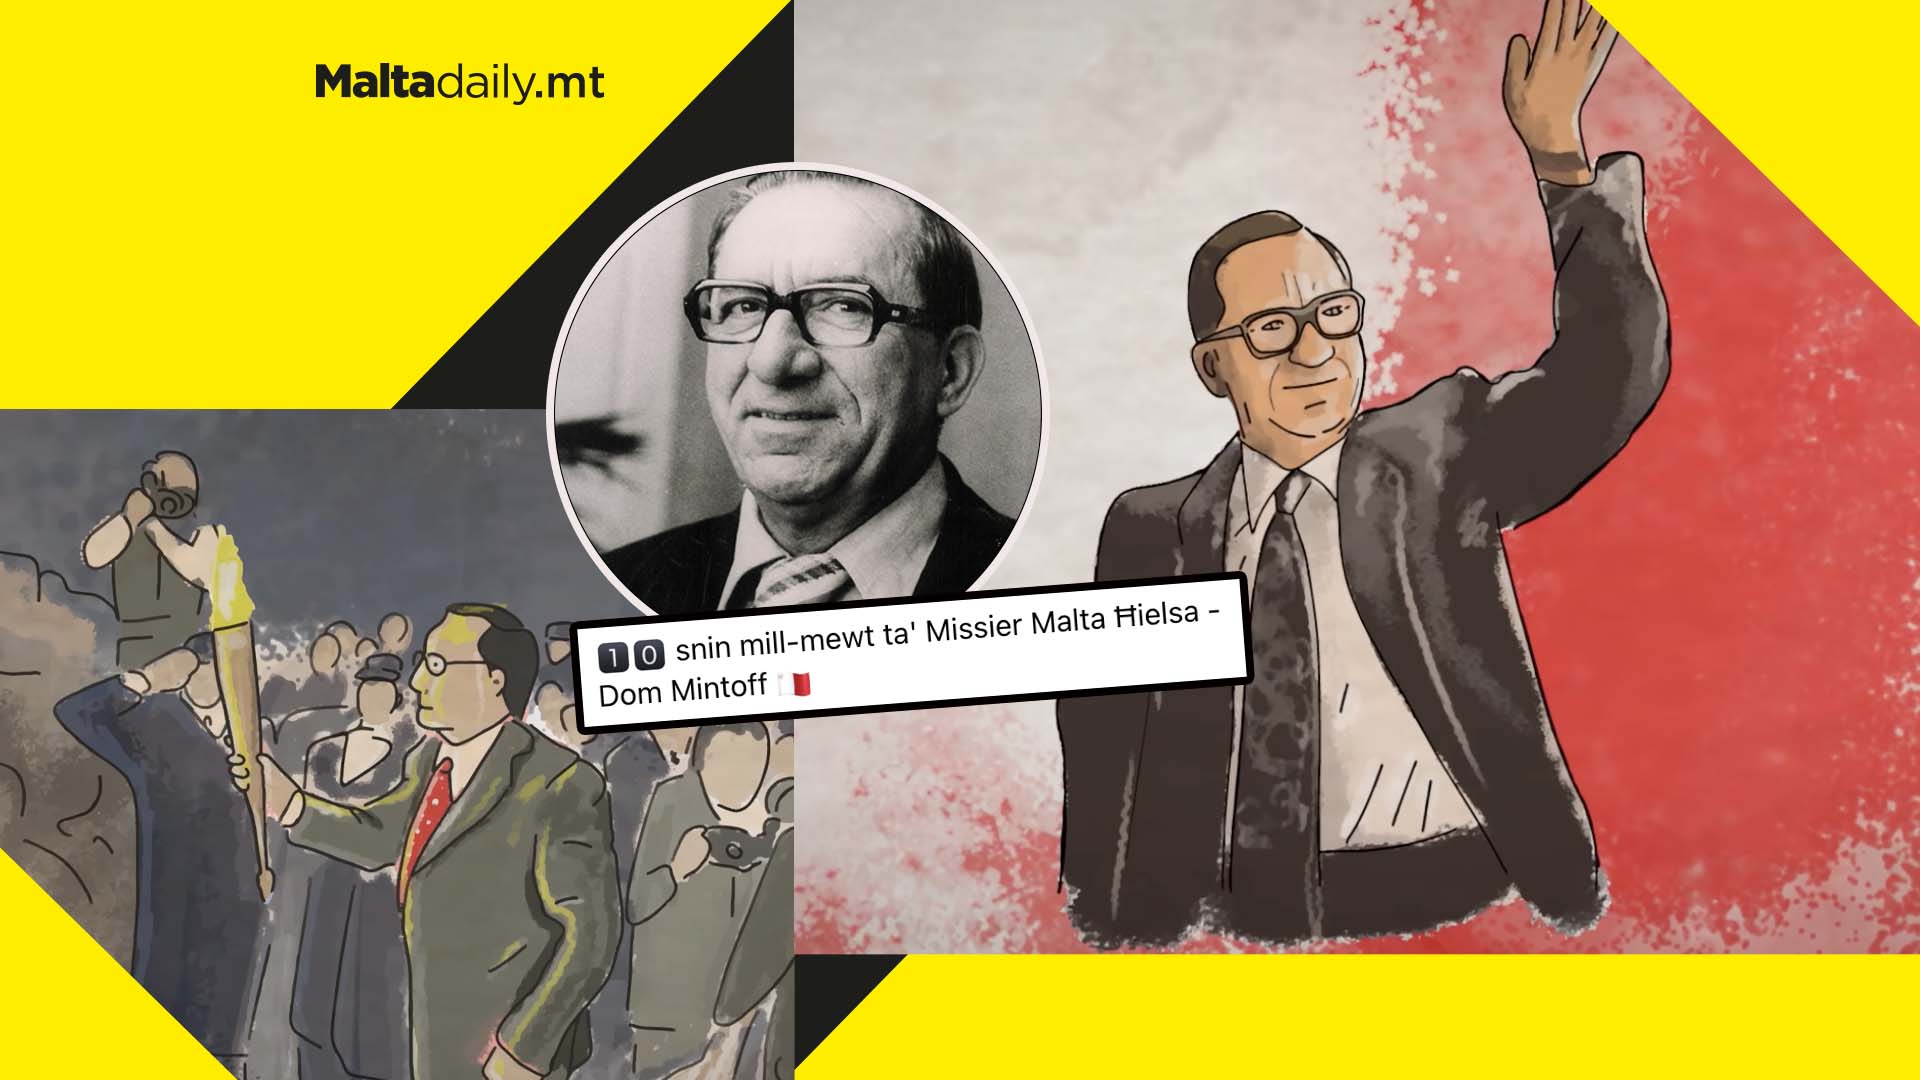 Labour Party commemorate 10 years since Dom Mintoff’s passing